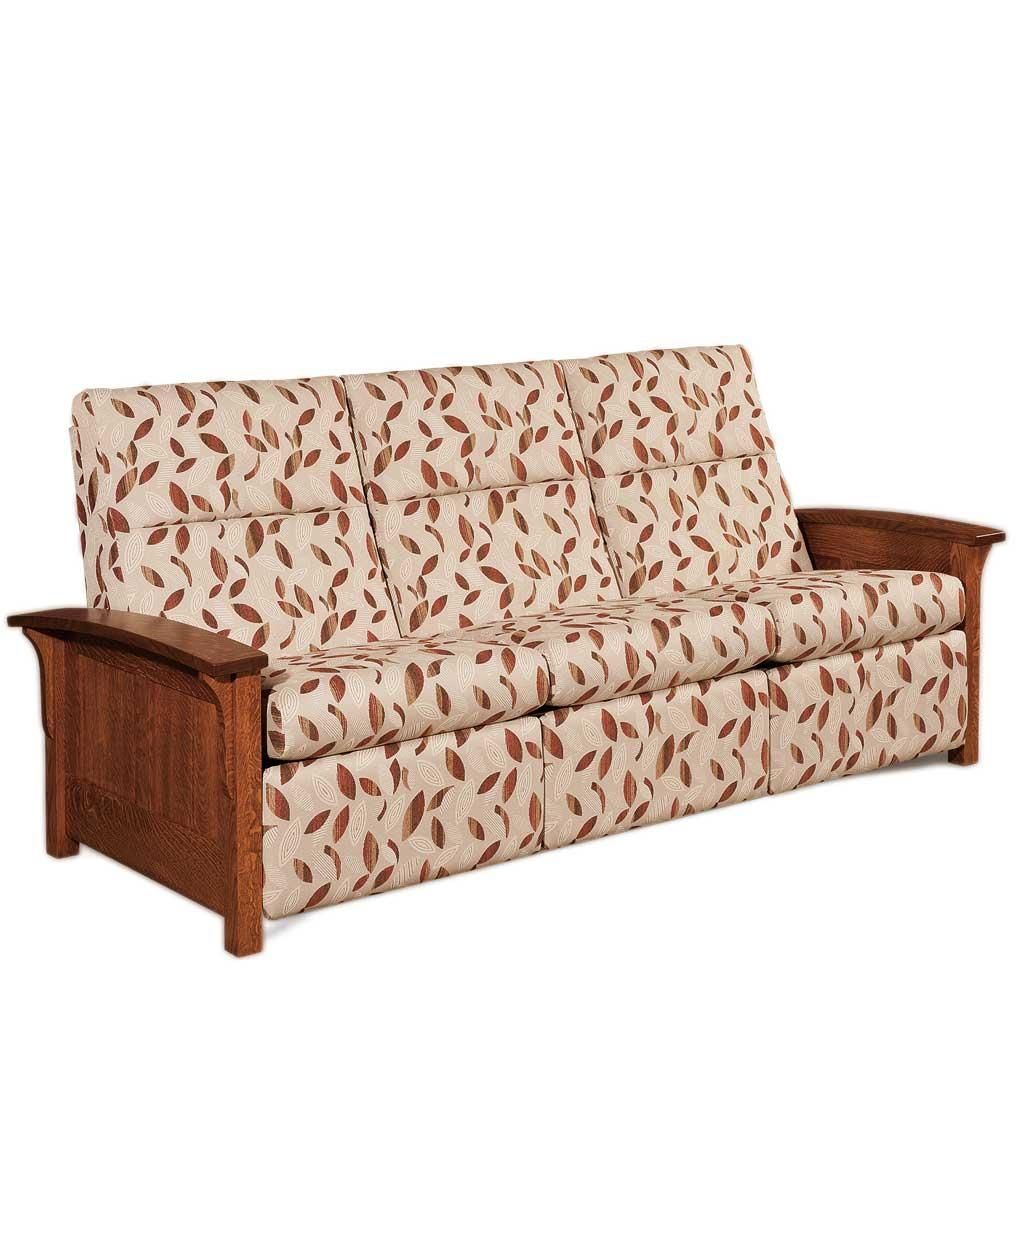 Skyline Panel Sofa Recliner – Amish Direct Furniture Throughout Skyline Sofas (View 17 of 20)